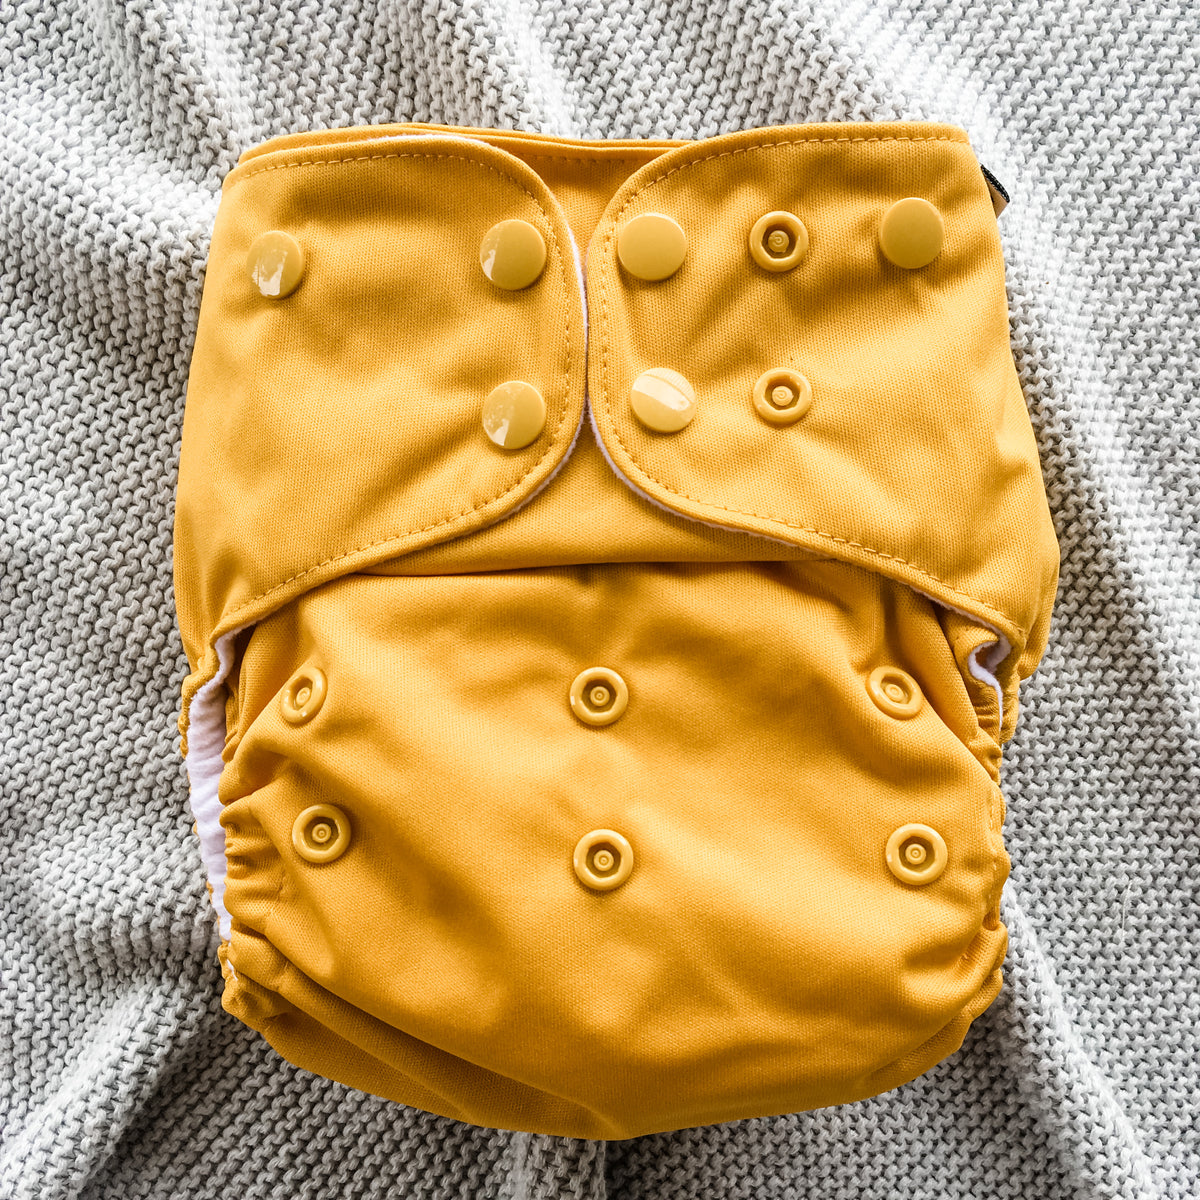 Frank Nappies have three rows of rise snaps to adjust fit around the legs. Many brands have only 2 rows of rise snaps. The extra row allows a snug fit on skinny newborn baby legs, whilst still accommodating the chubbiest of thighs.